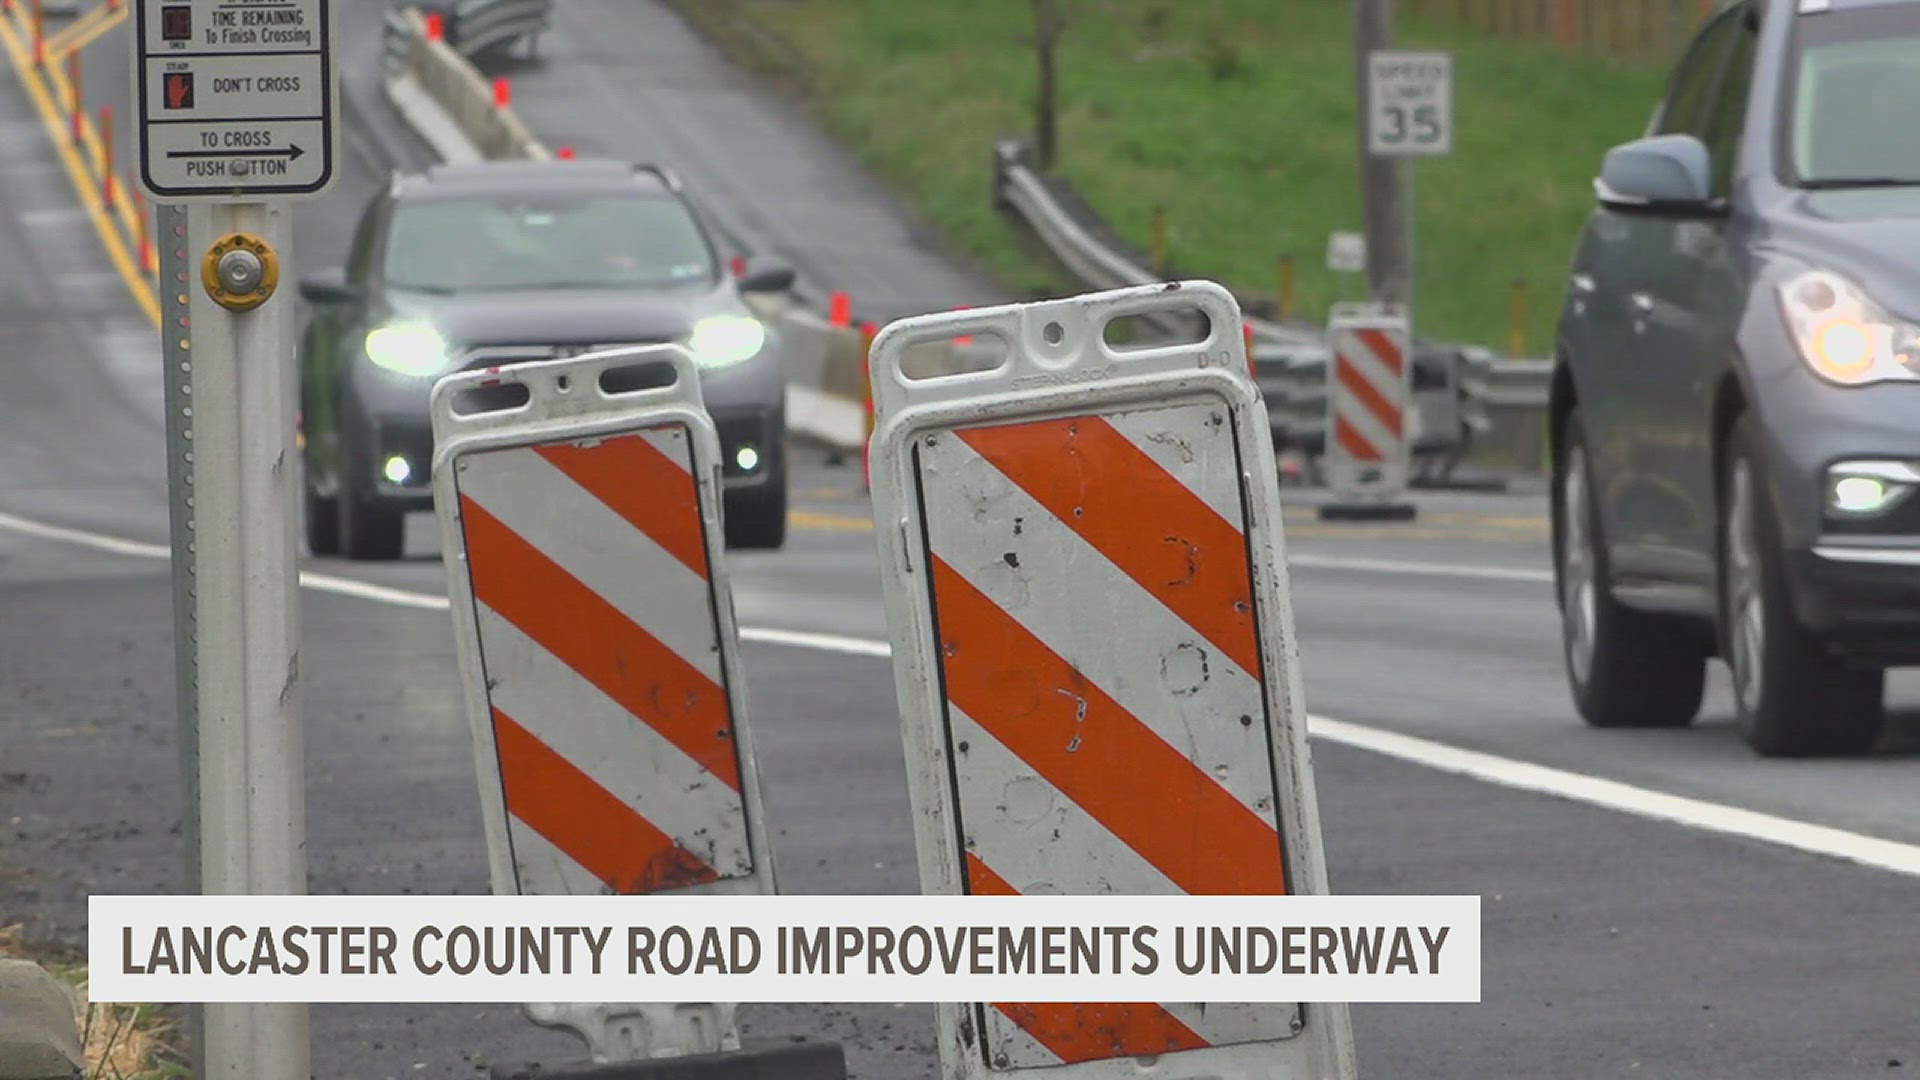 PennDOT is currently making a number of safety and accessibility improvements to the road between PA 772 and PA 896.